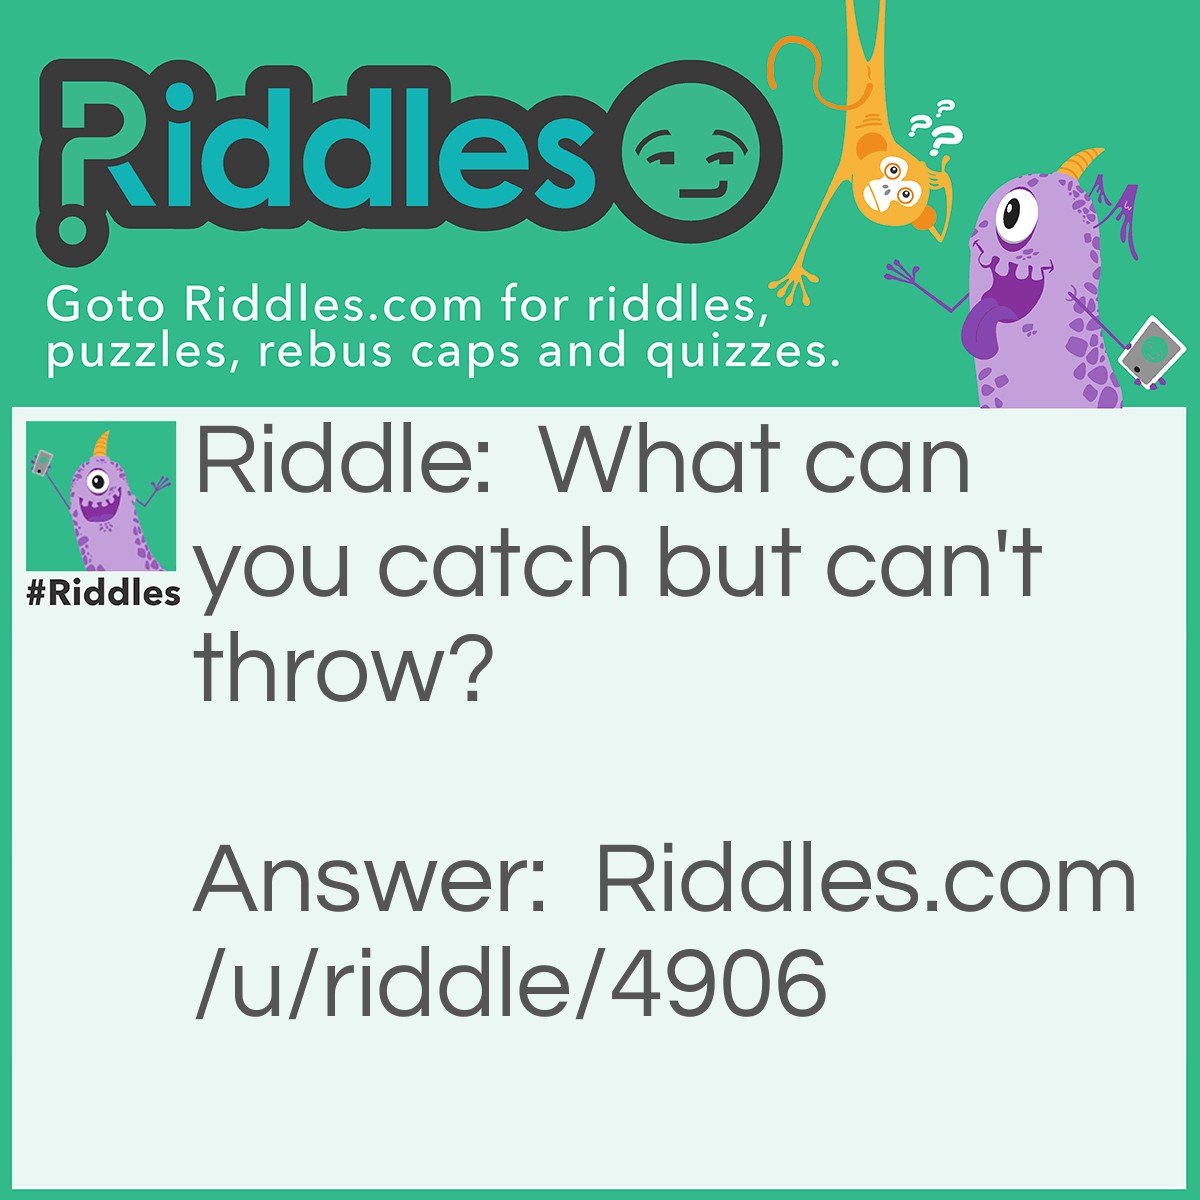 Riddle: What can you catch but can't throw? Answer: Cough/cold.